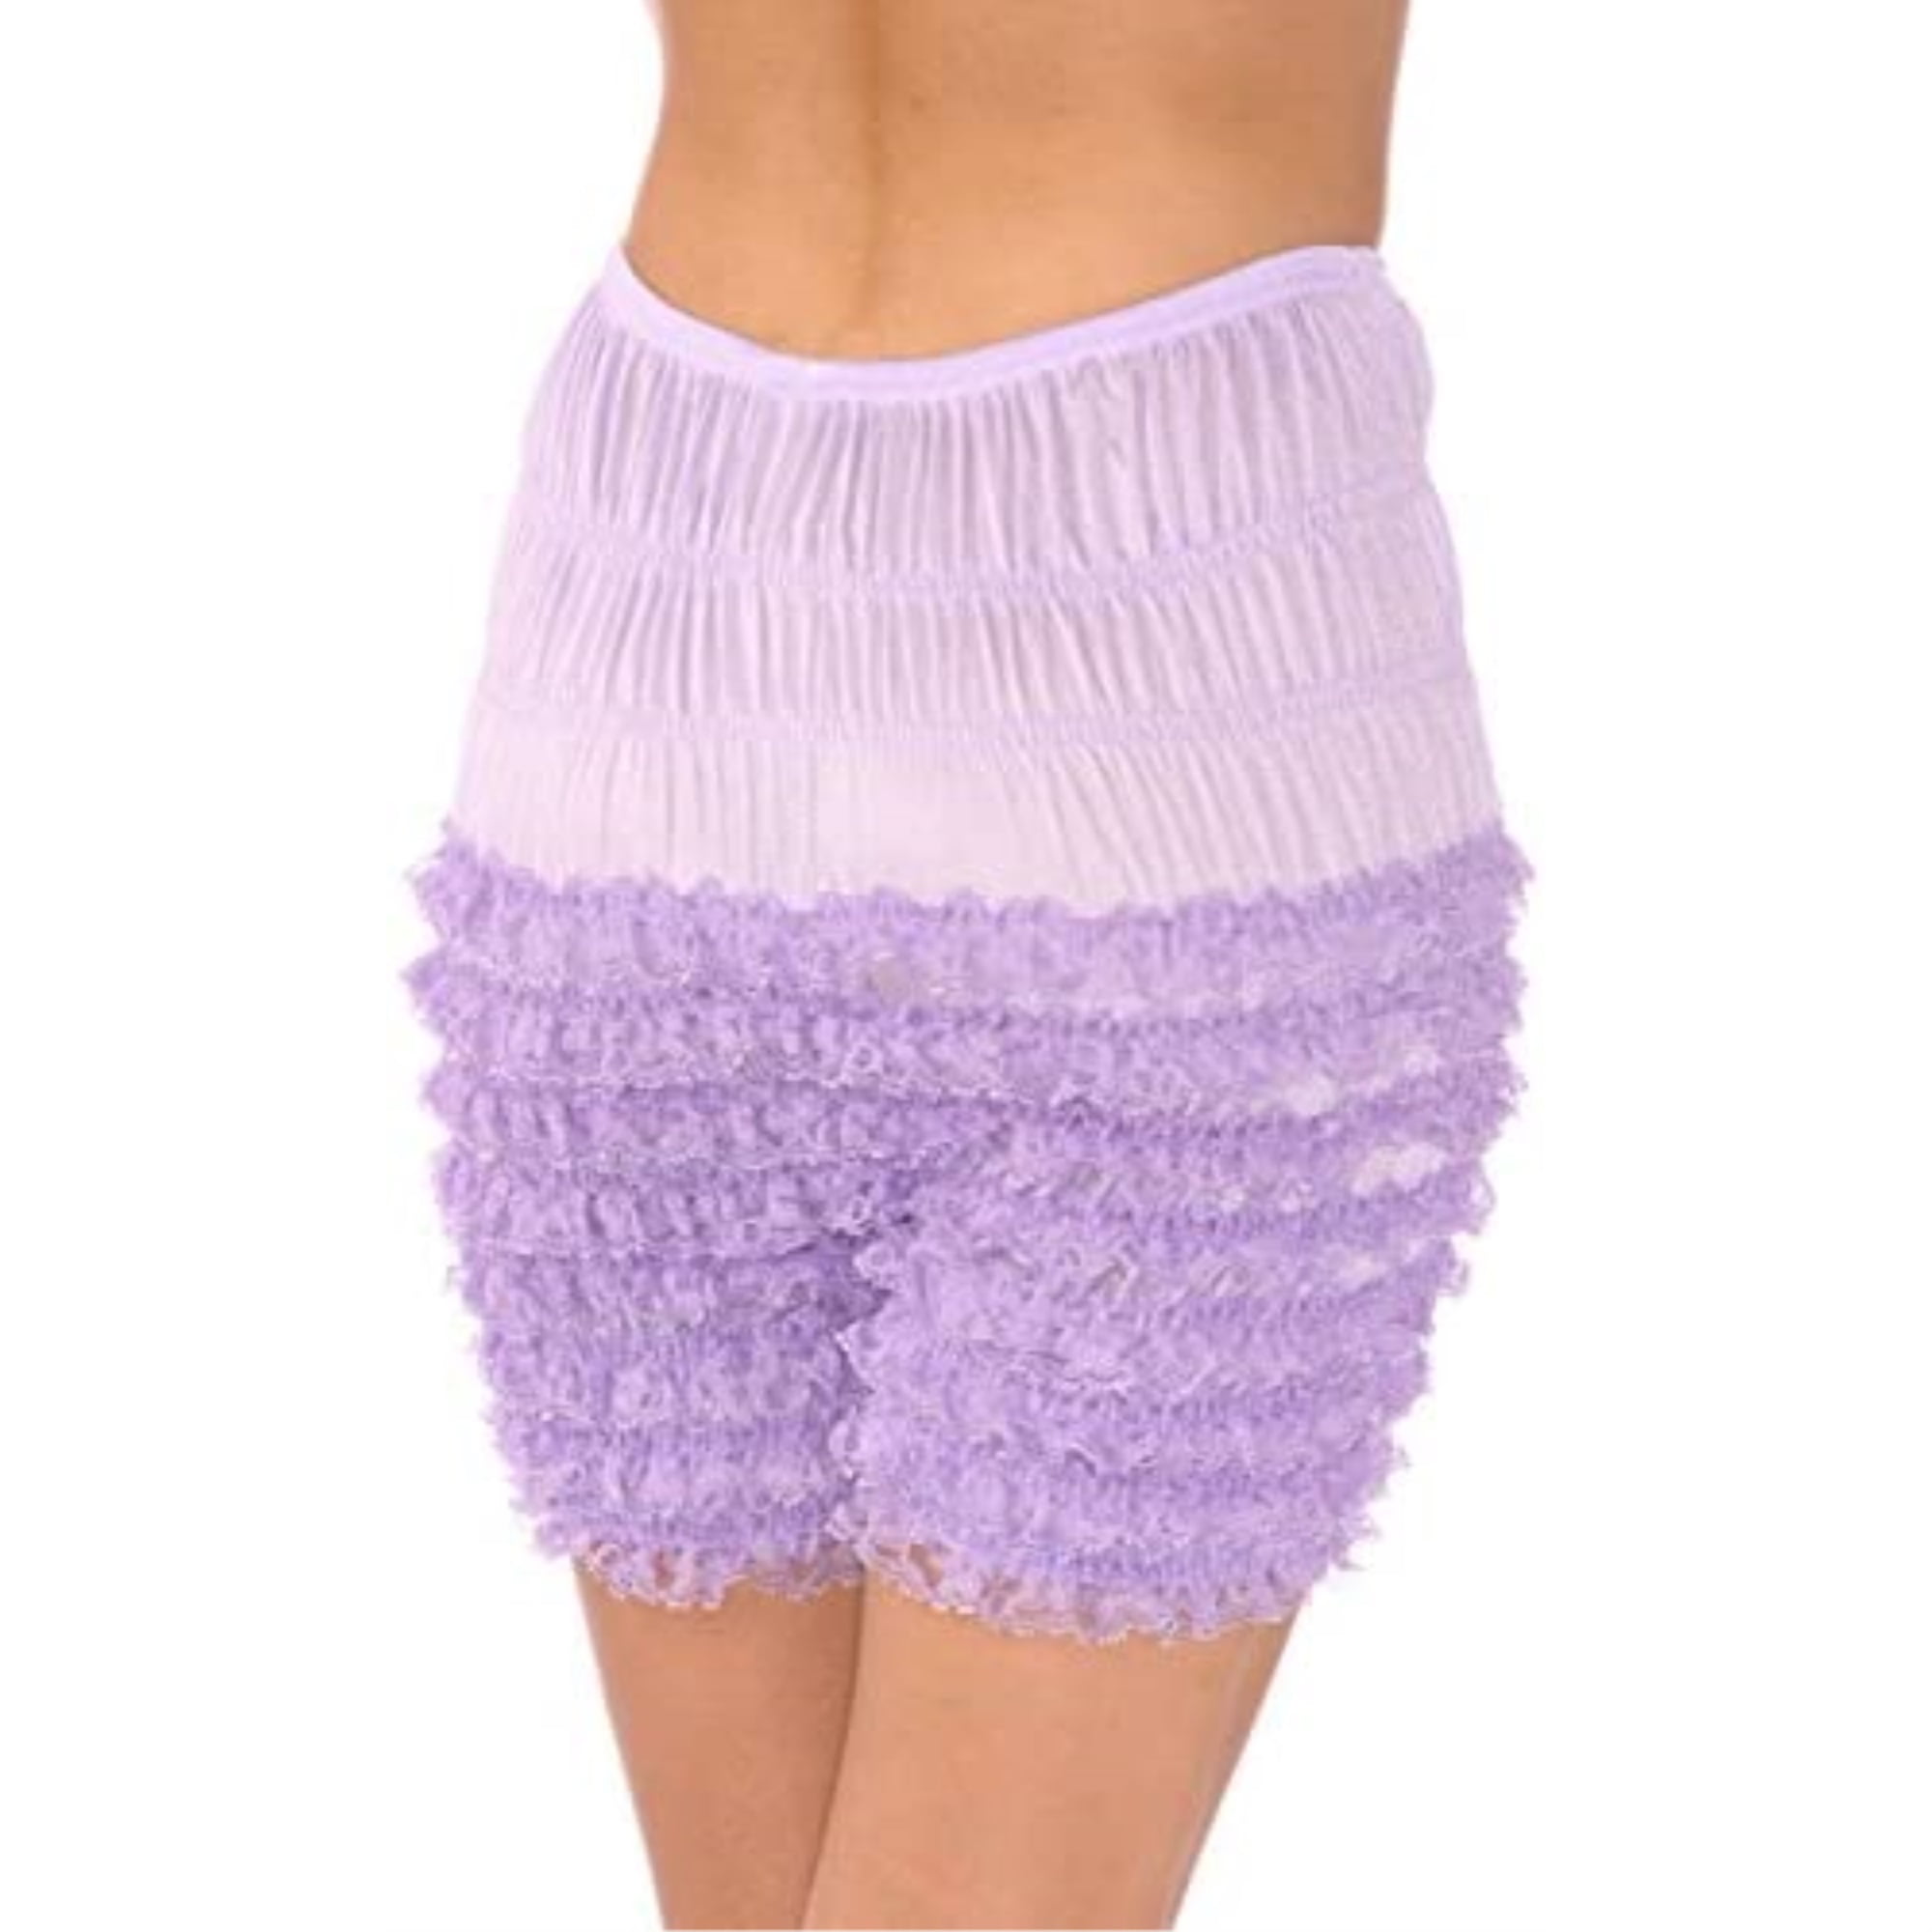 Malco Modes Adult Pettipants, Style N24, Sexy Ruffled Panties (Lilac ...